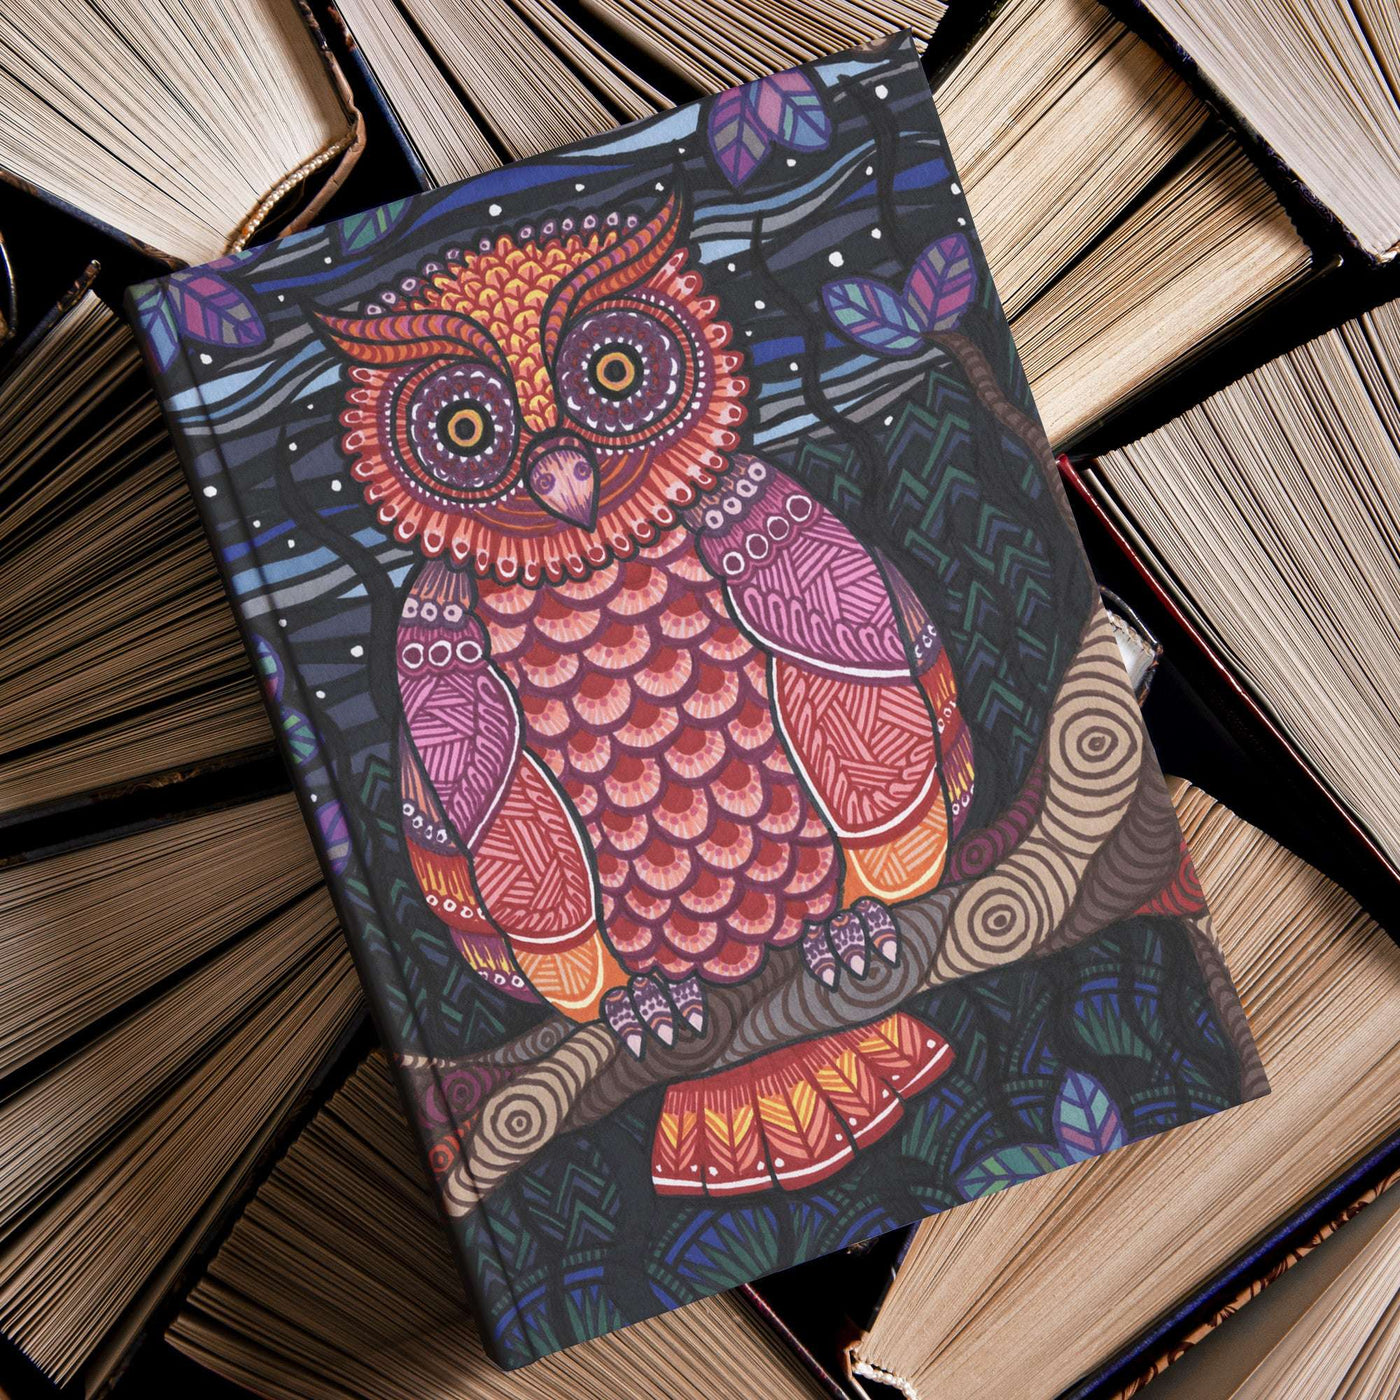 The colorful cover of an illustrated Owl Tree Journal, placed amidst a pile of old hardcover books.